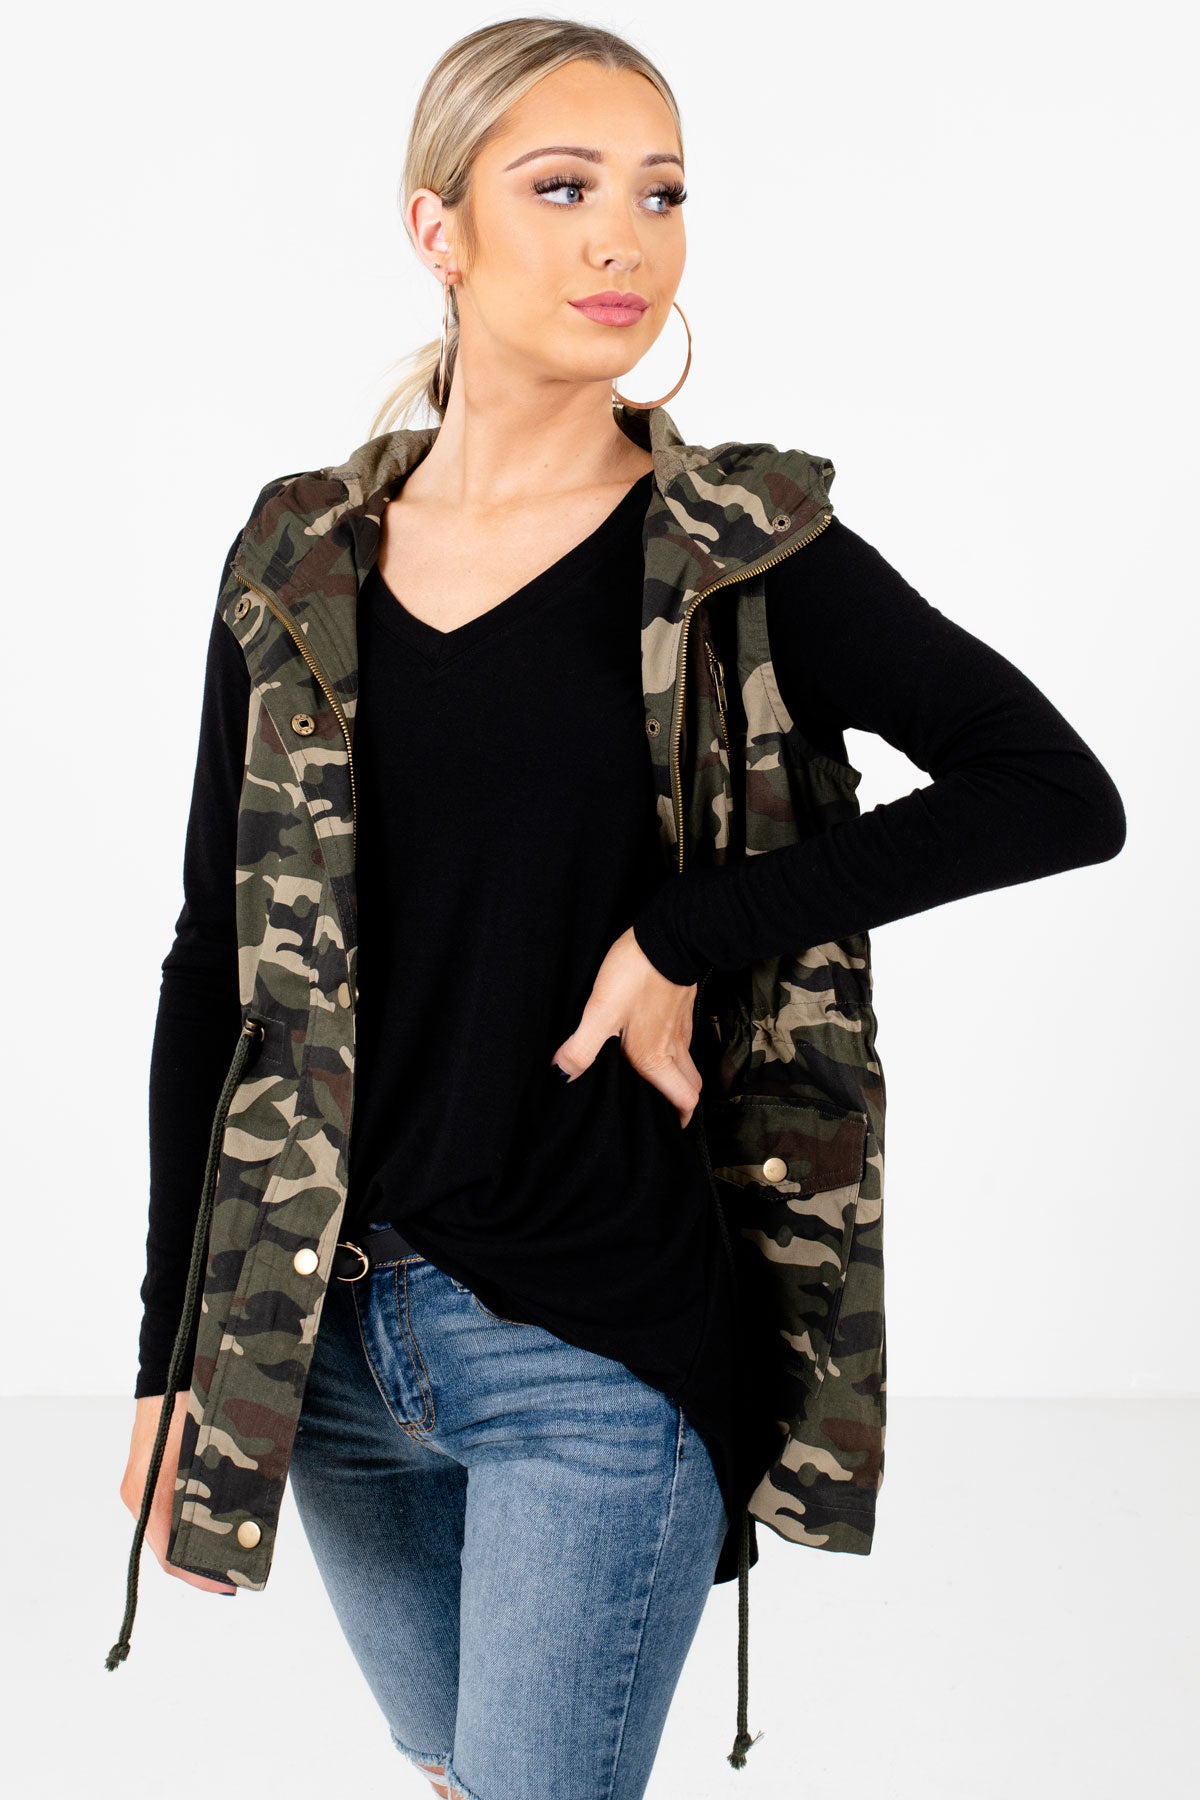 Green Camouflage Cute and Comfortable Boutique Vests for Women